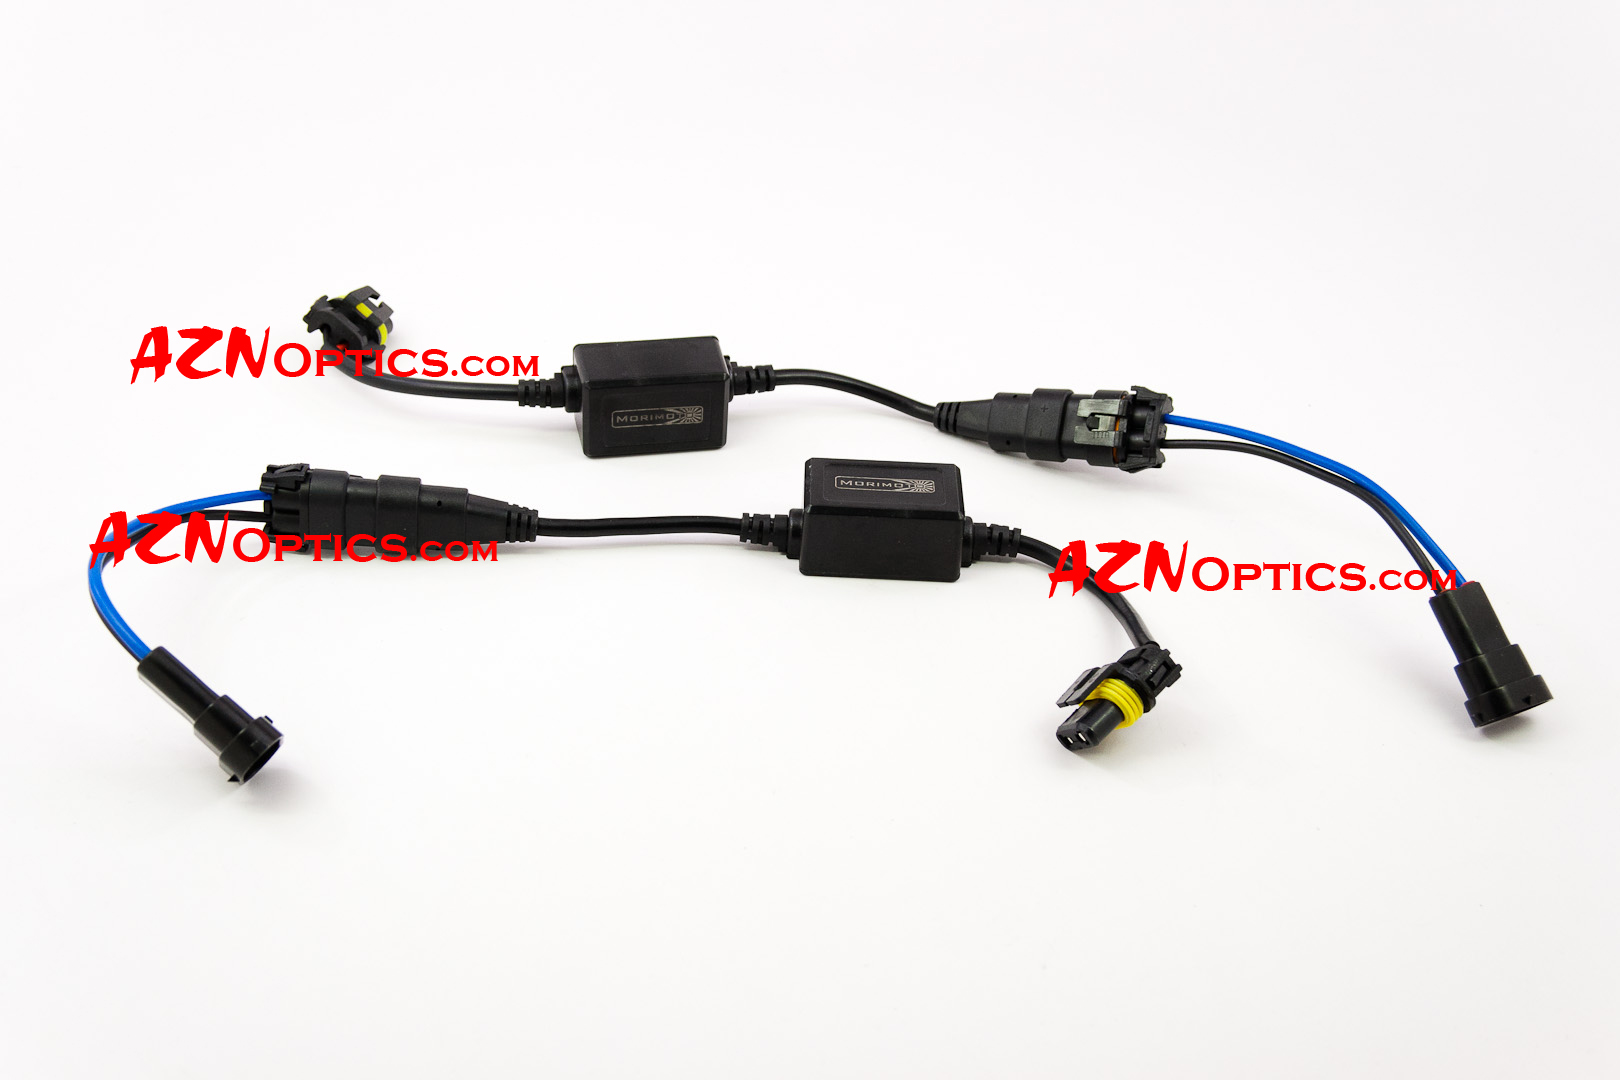 Morimoto Standalone Can-Bus Relay Harness - Click Image to Close